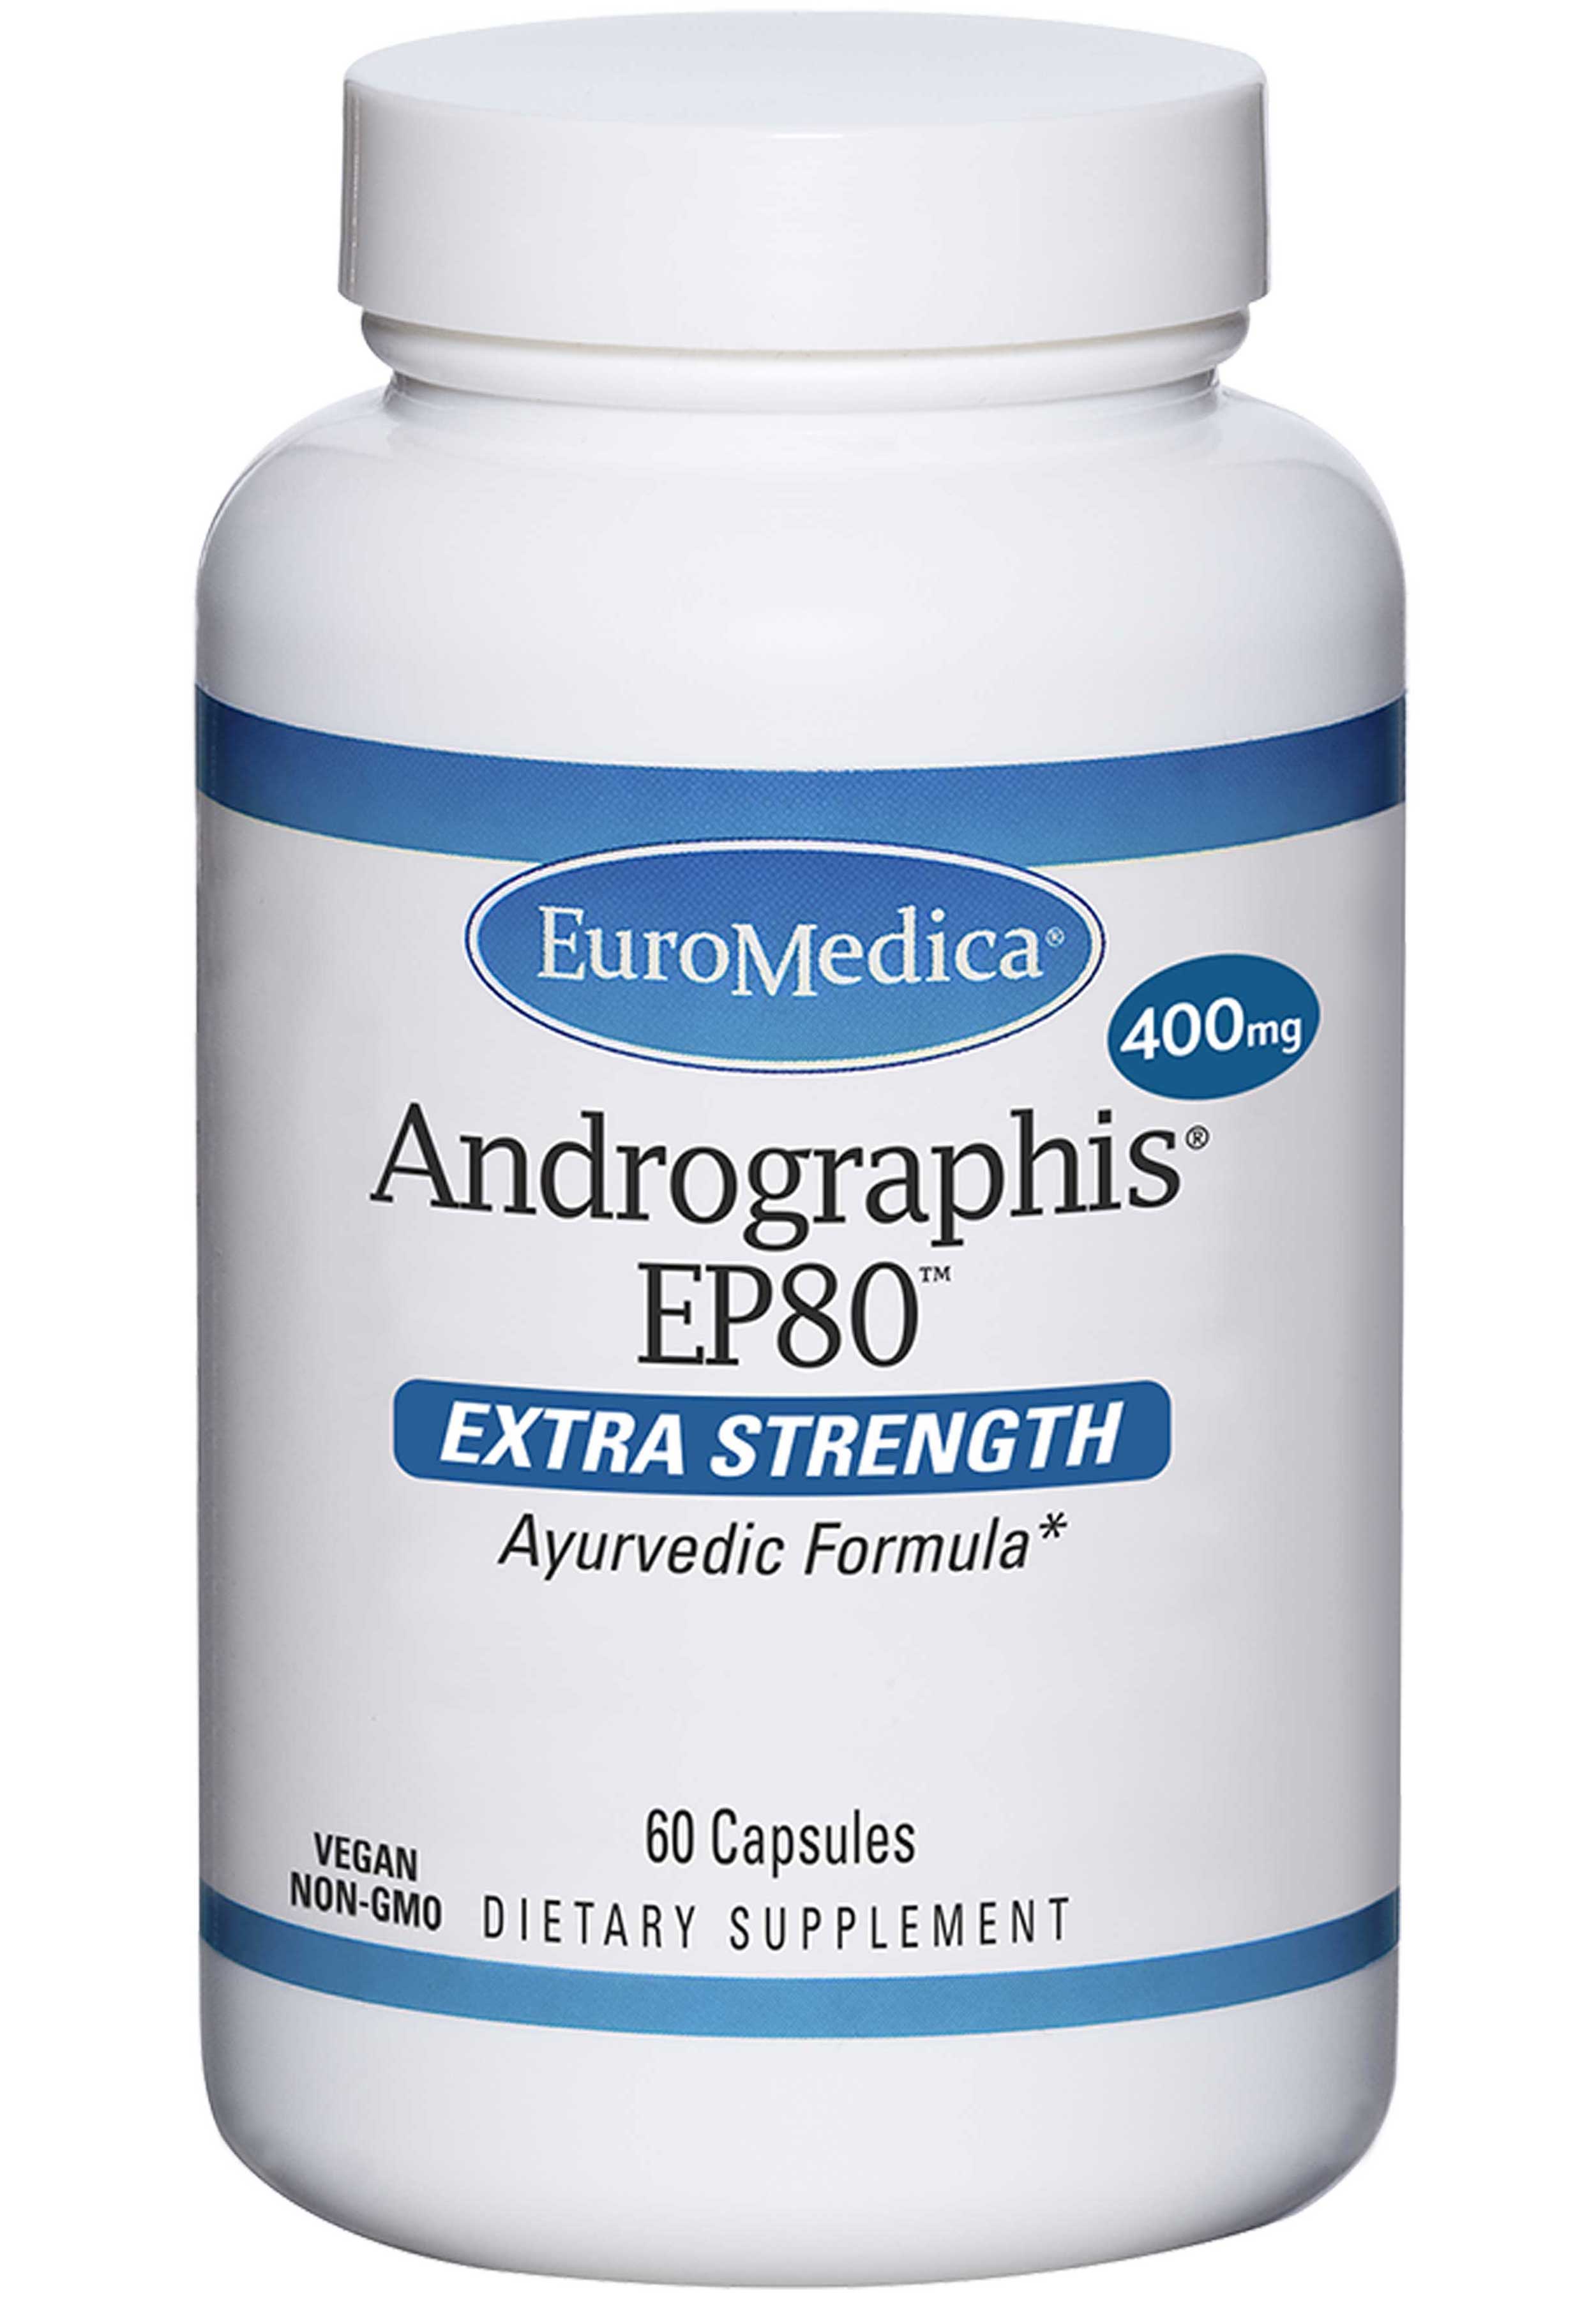 EuroMedica Andrographis EP80 Extra Strength